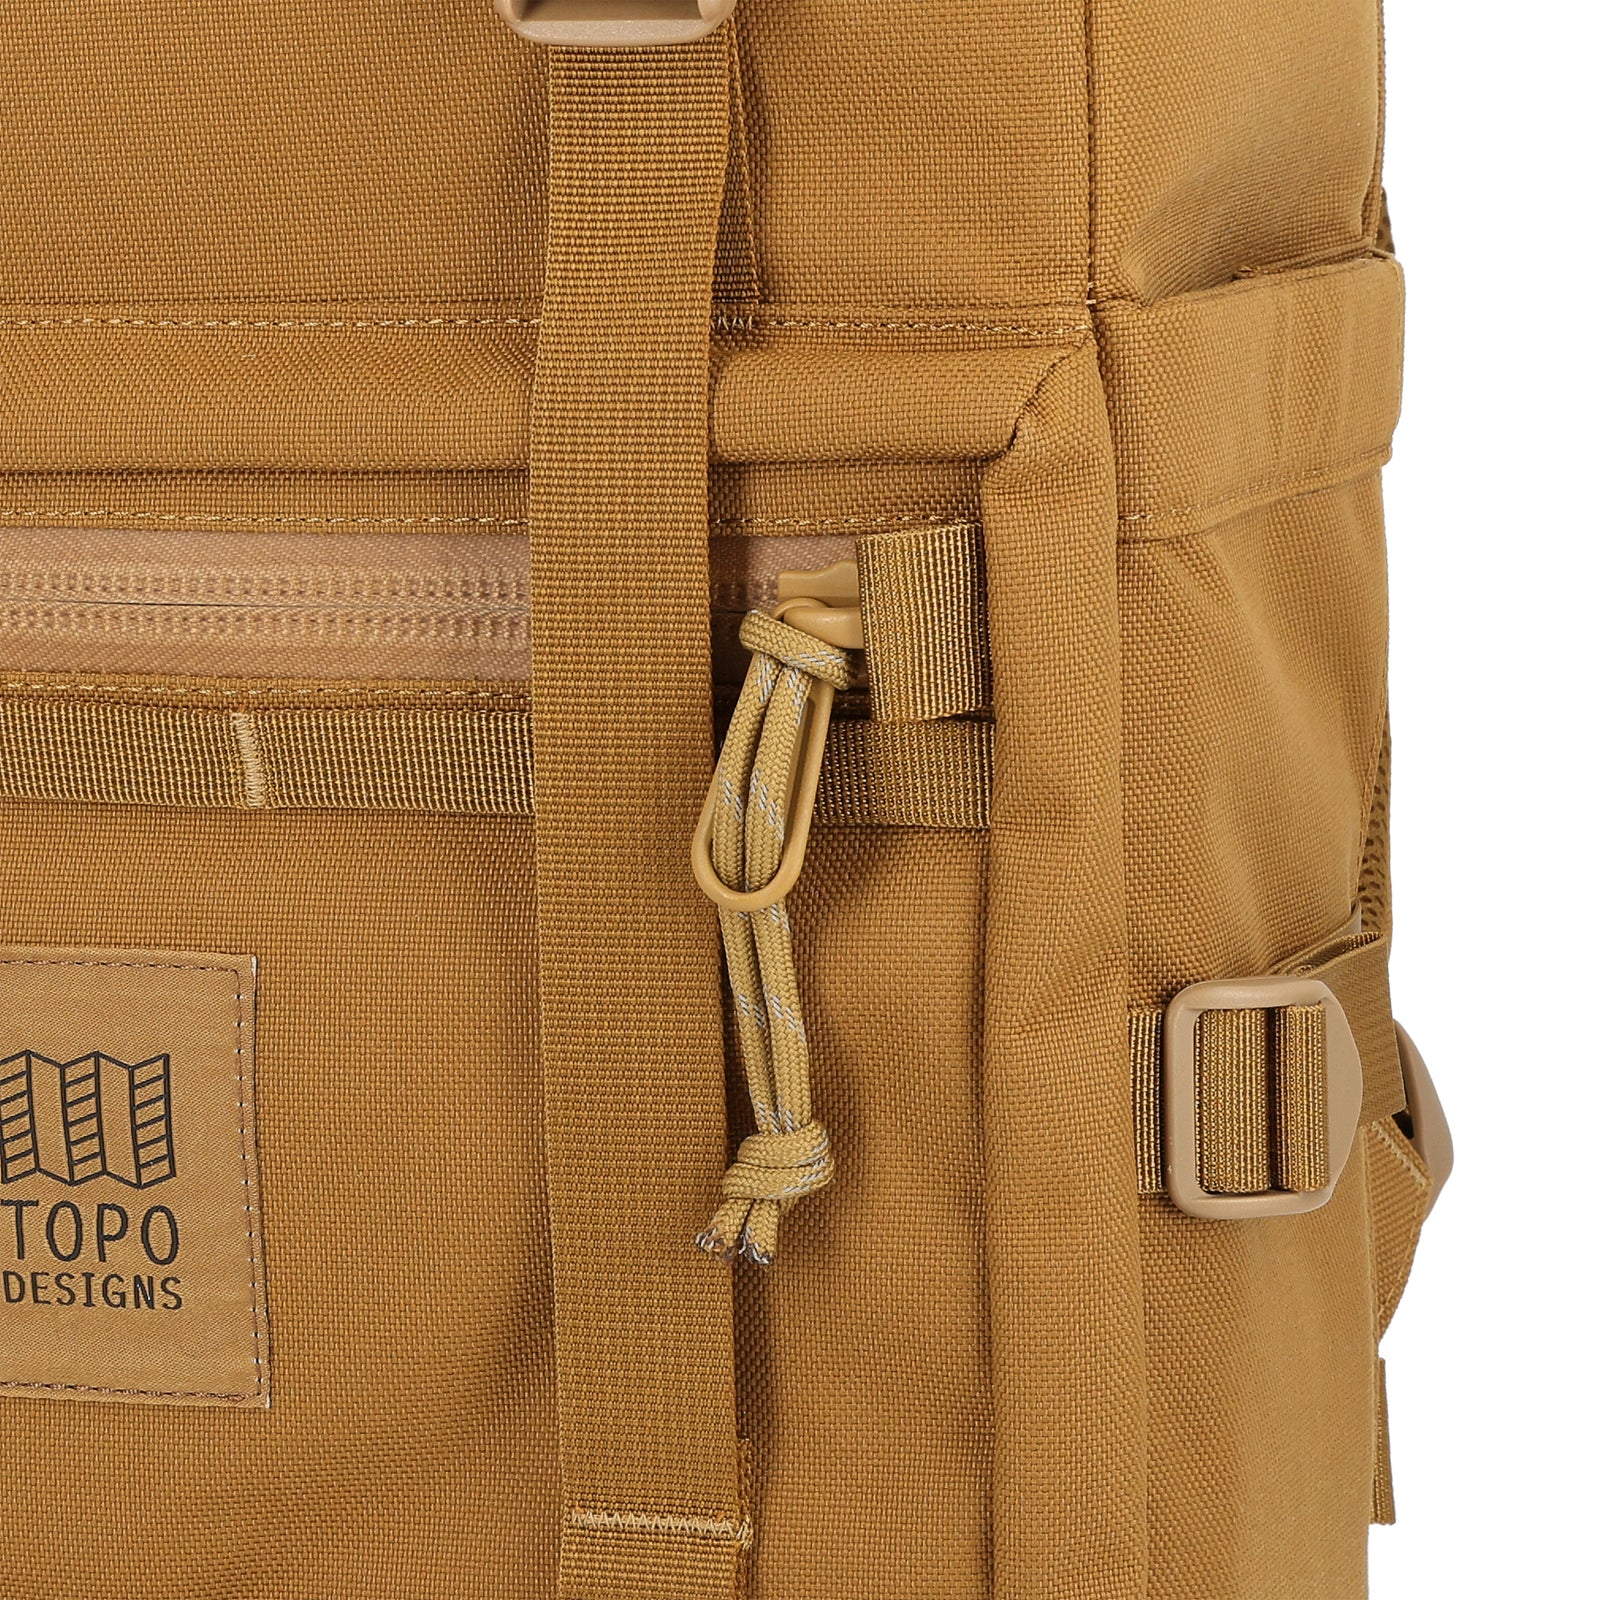 General detail Shot of the Topo Designs Rover Pack Tech in "Dark Khaki" brown showing front logo patch, zipper pulls, and daisy chain webbing.